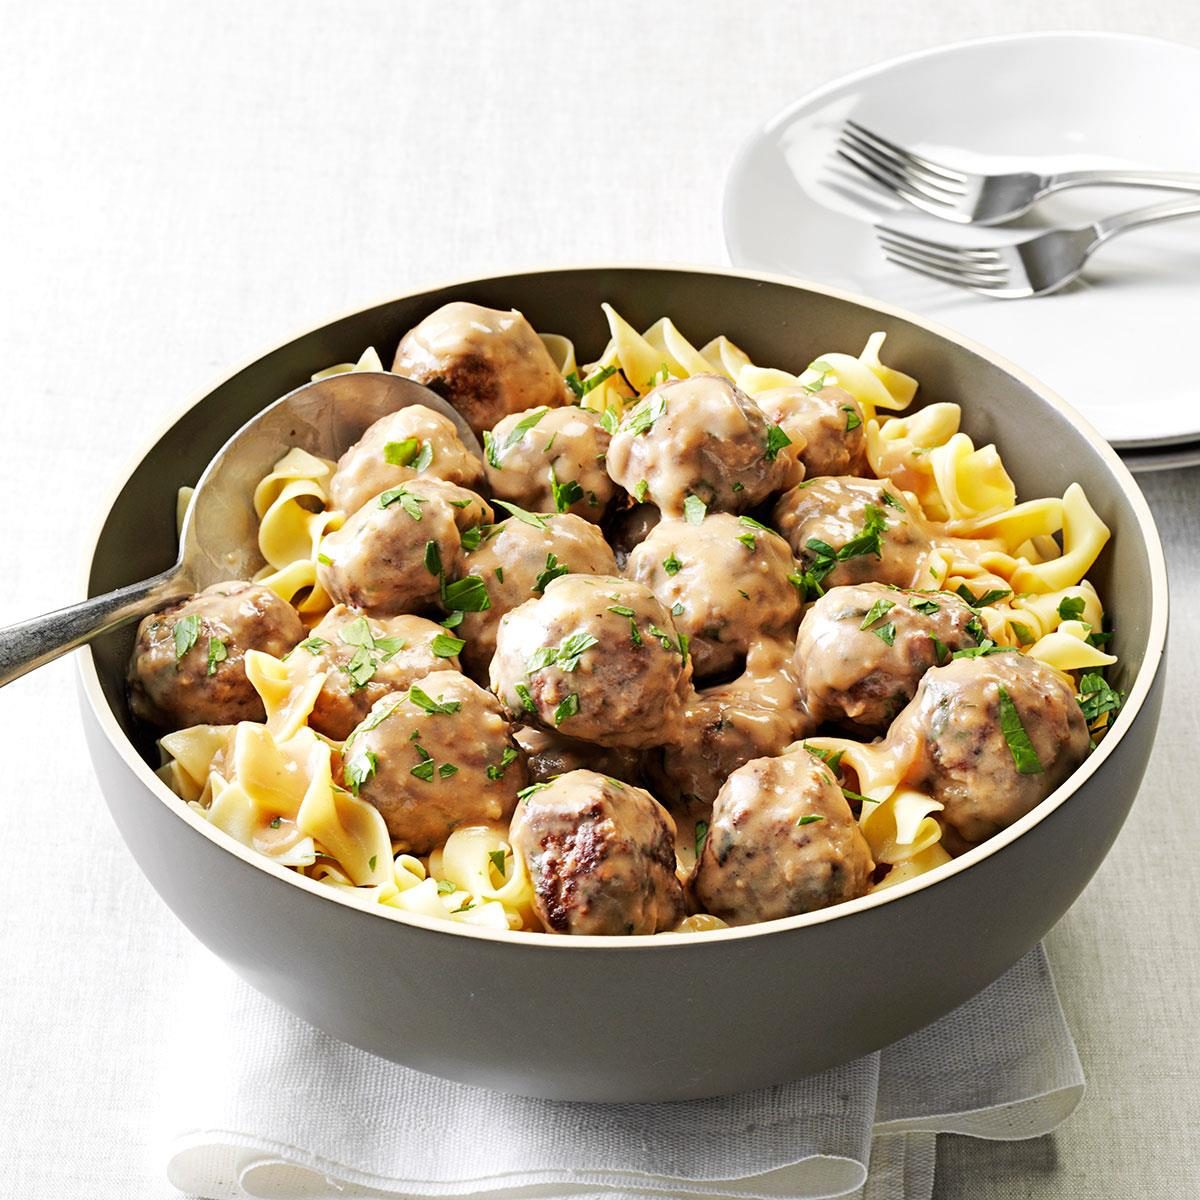 <p>Mom fixed this Swedish meatball recipe for all sorts of family dinners, potluck suppers and PTA meetings. The scent of browning meat is intoxicating. Add to that the sweet smell of onions caramelizing, and everyone’s mouth starts watering. —Marybeth Mank, Mesquite, Texas</p> <div class="listicle-page__buttons"> <div class="listicle-page__cta-button"><a href='https://www.tasteofhome.com/recipes/mom-s-swedish-meatballs/'>Get Recipe</a></div> </div>